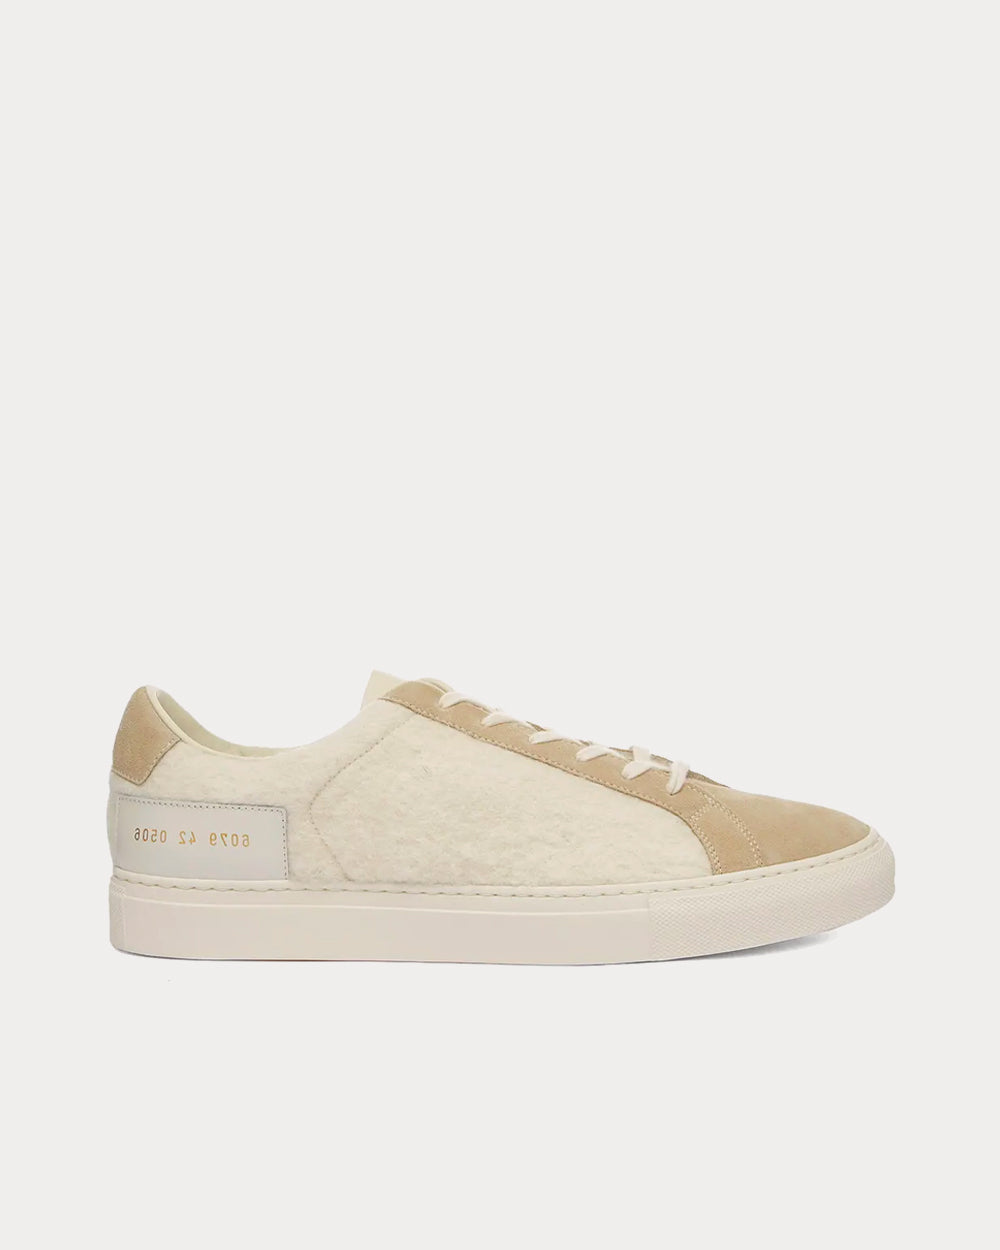 Common Projects - Retro Wool White Low Top Sneakers